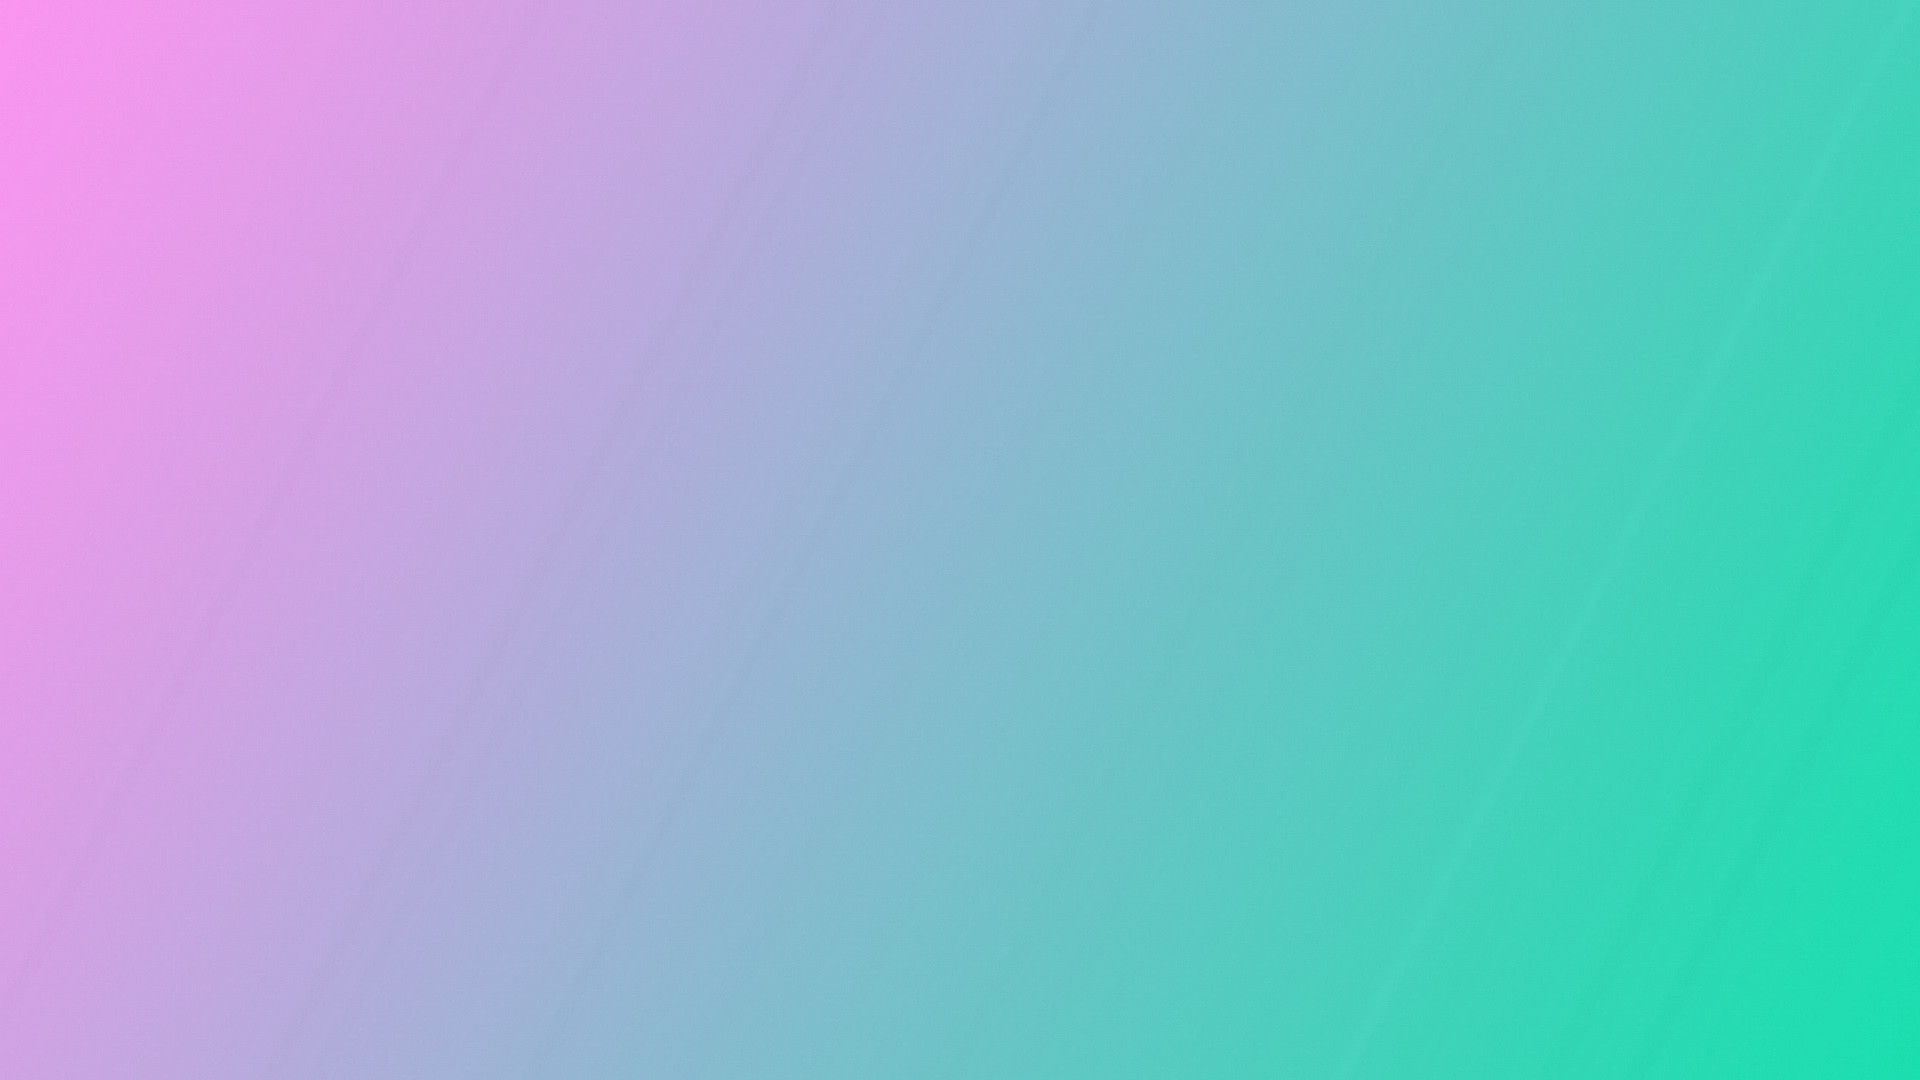 Pastel colors backgrounds, Minimalistic and chic, Versatile and timeless, Soft and gentle, 1920x1080 Full HD Desktop